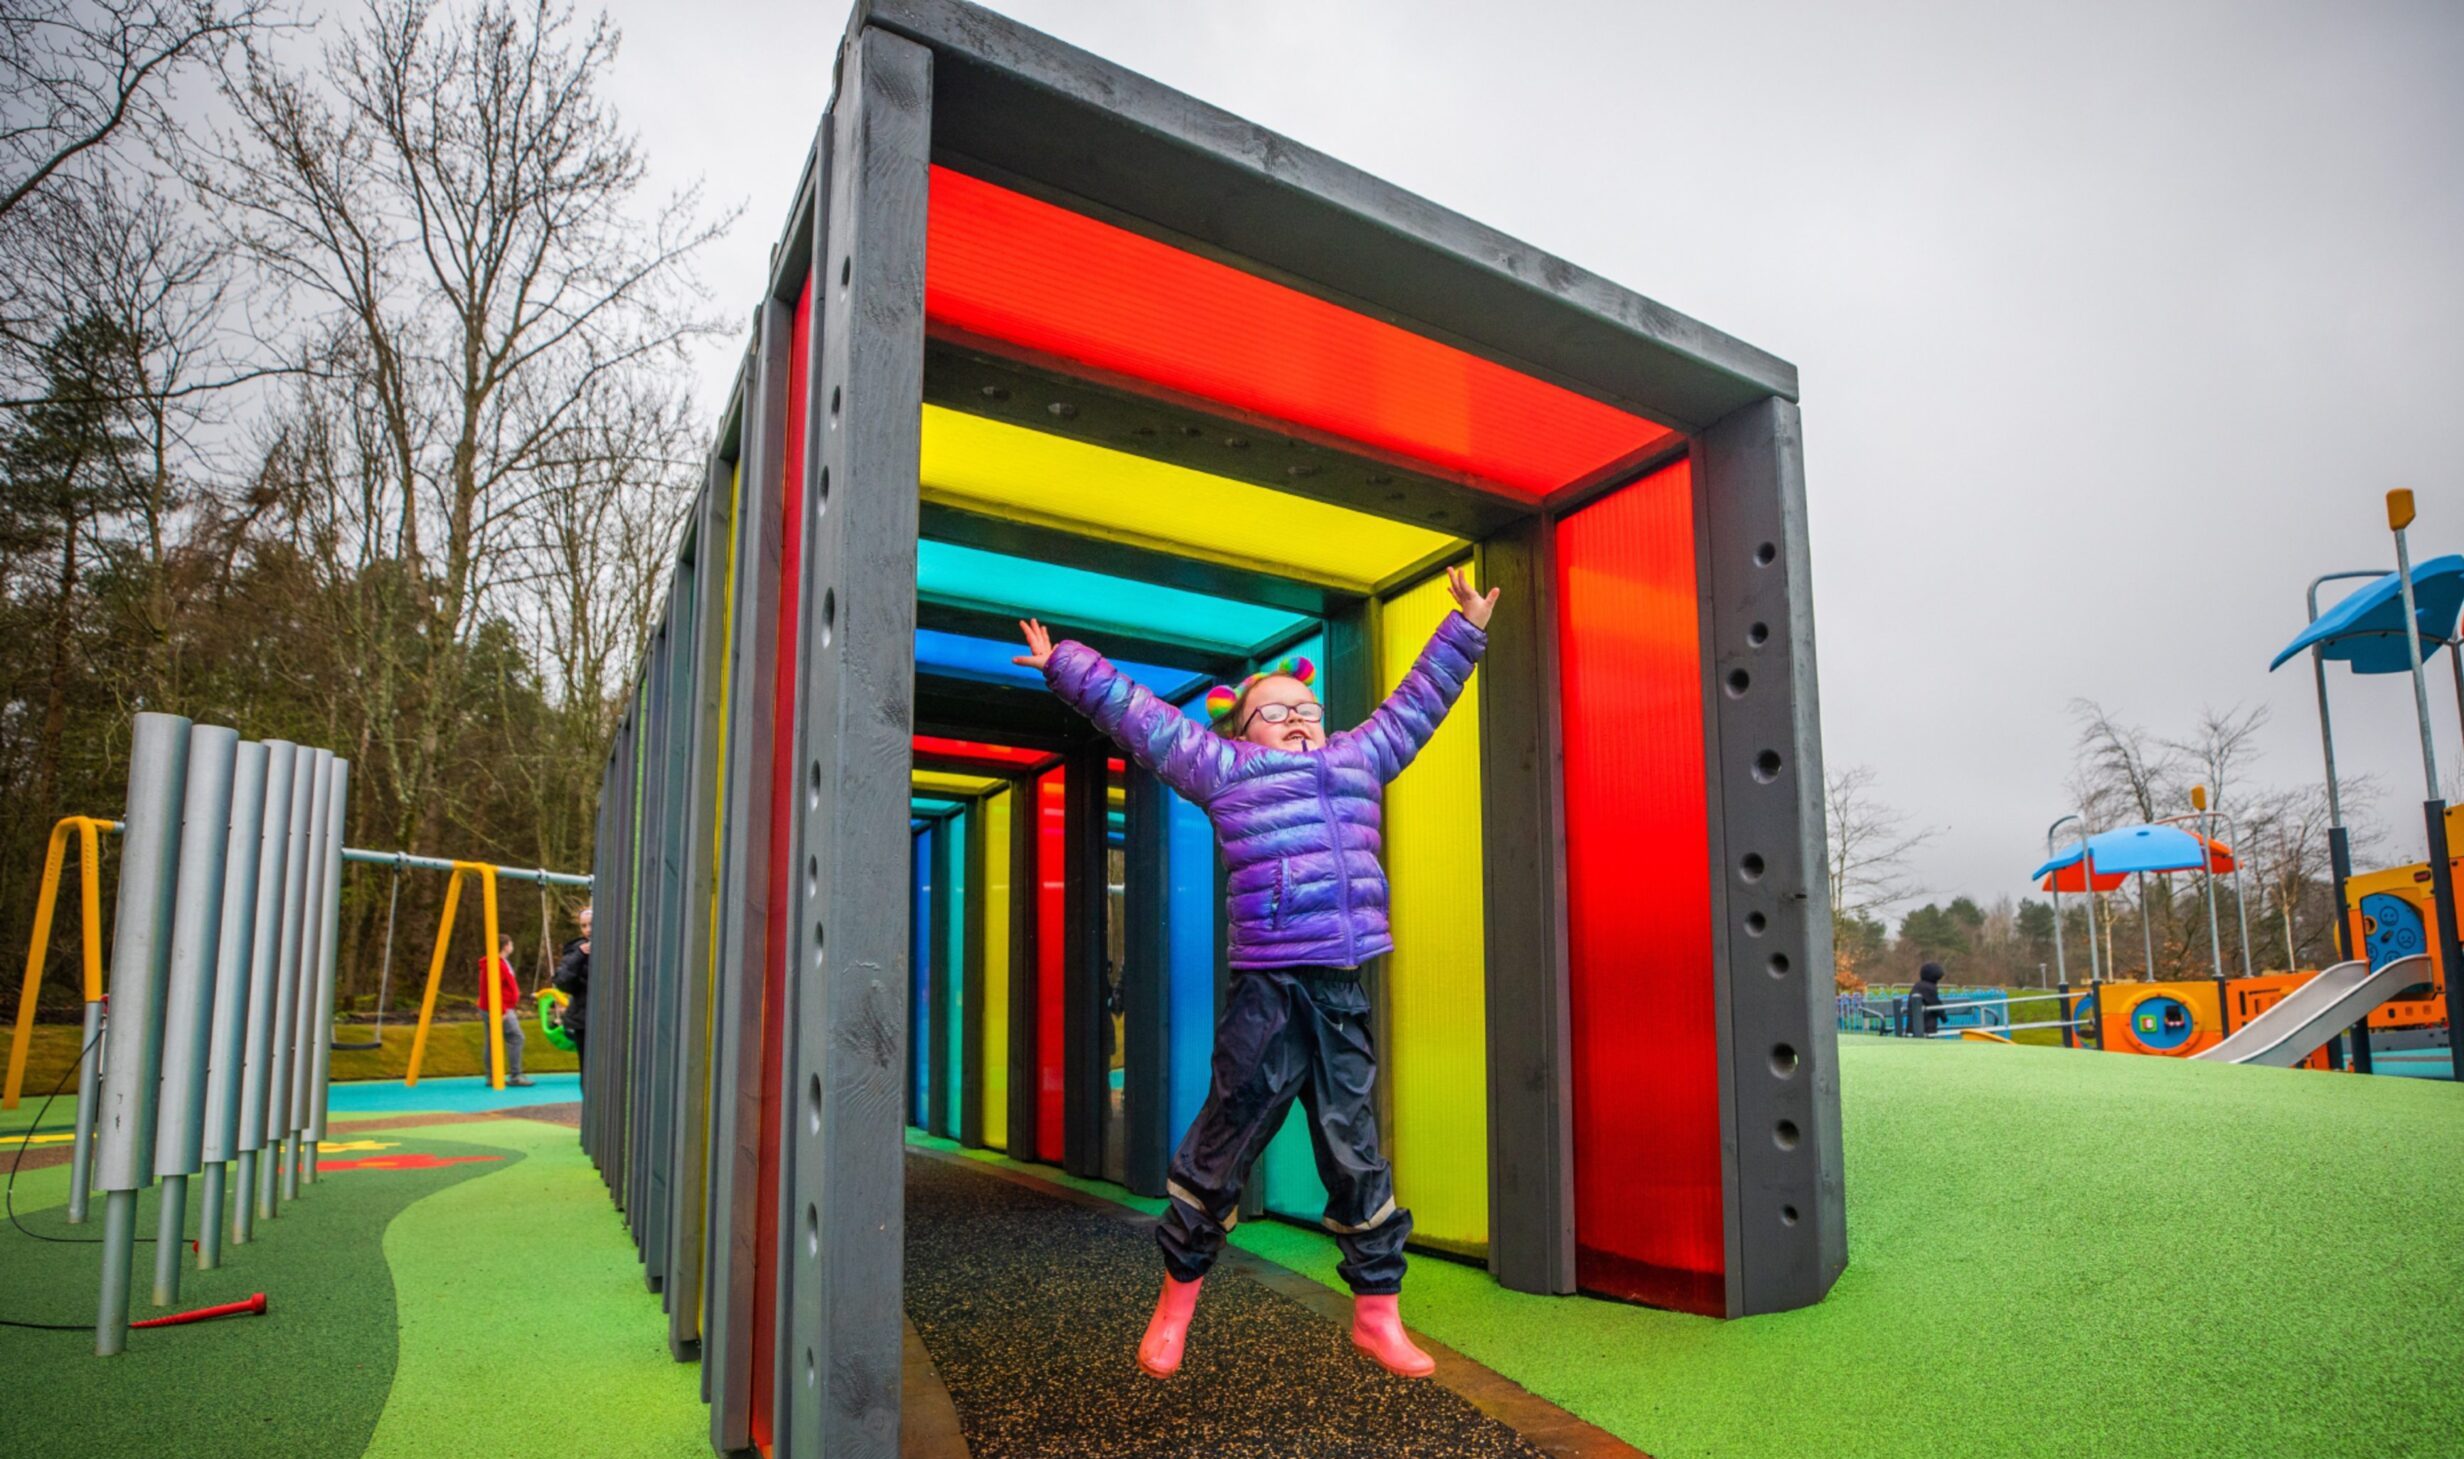 Ava Paterson jumping in a colourful tunnel at Lochore Meadows play park.